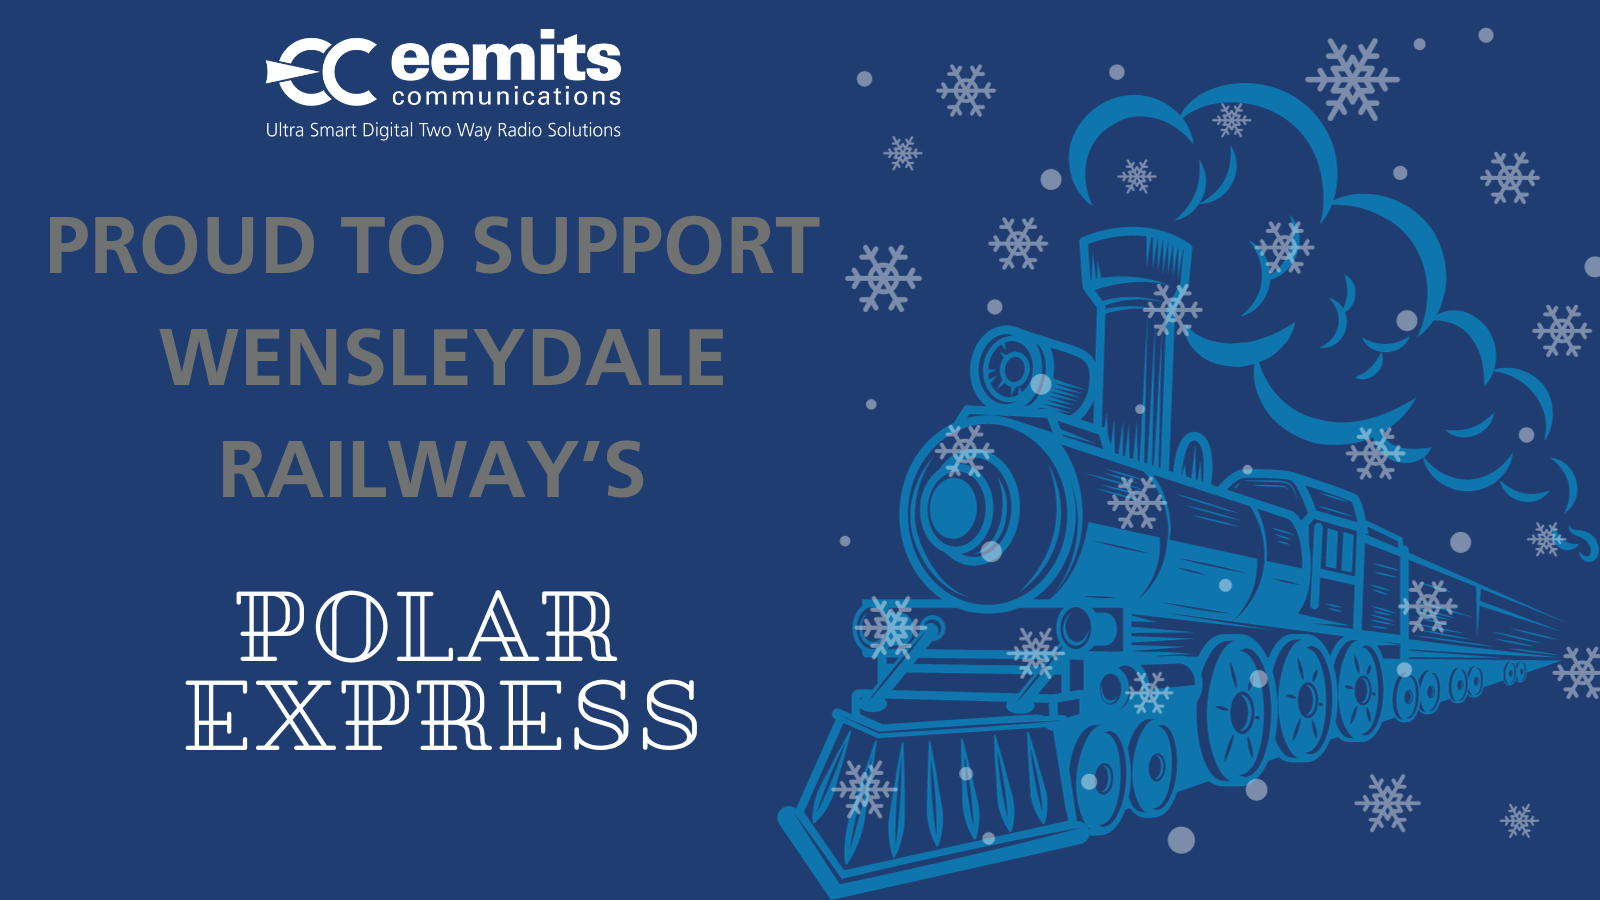 Eemits is Proud to Support Wensleydale Railway's Polar Express Train Journey